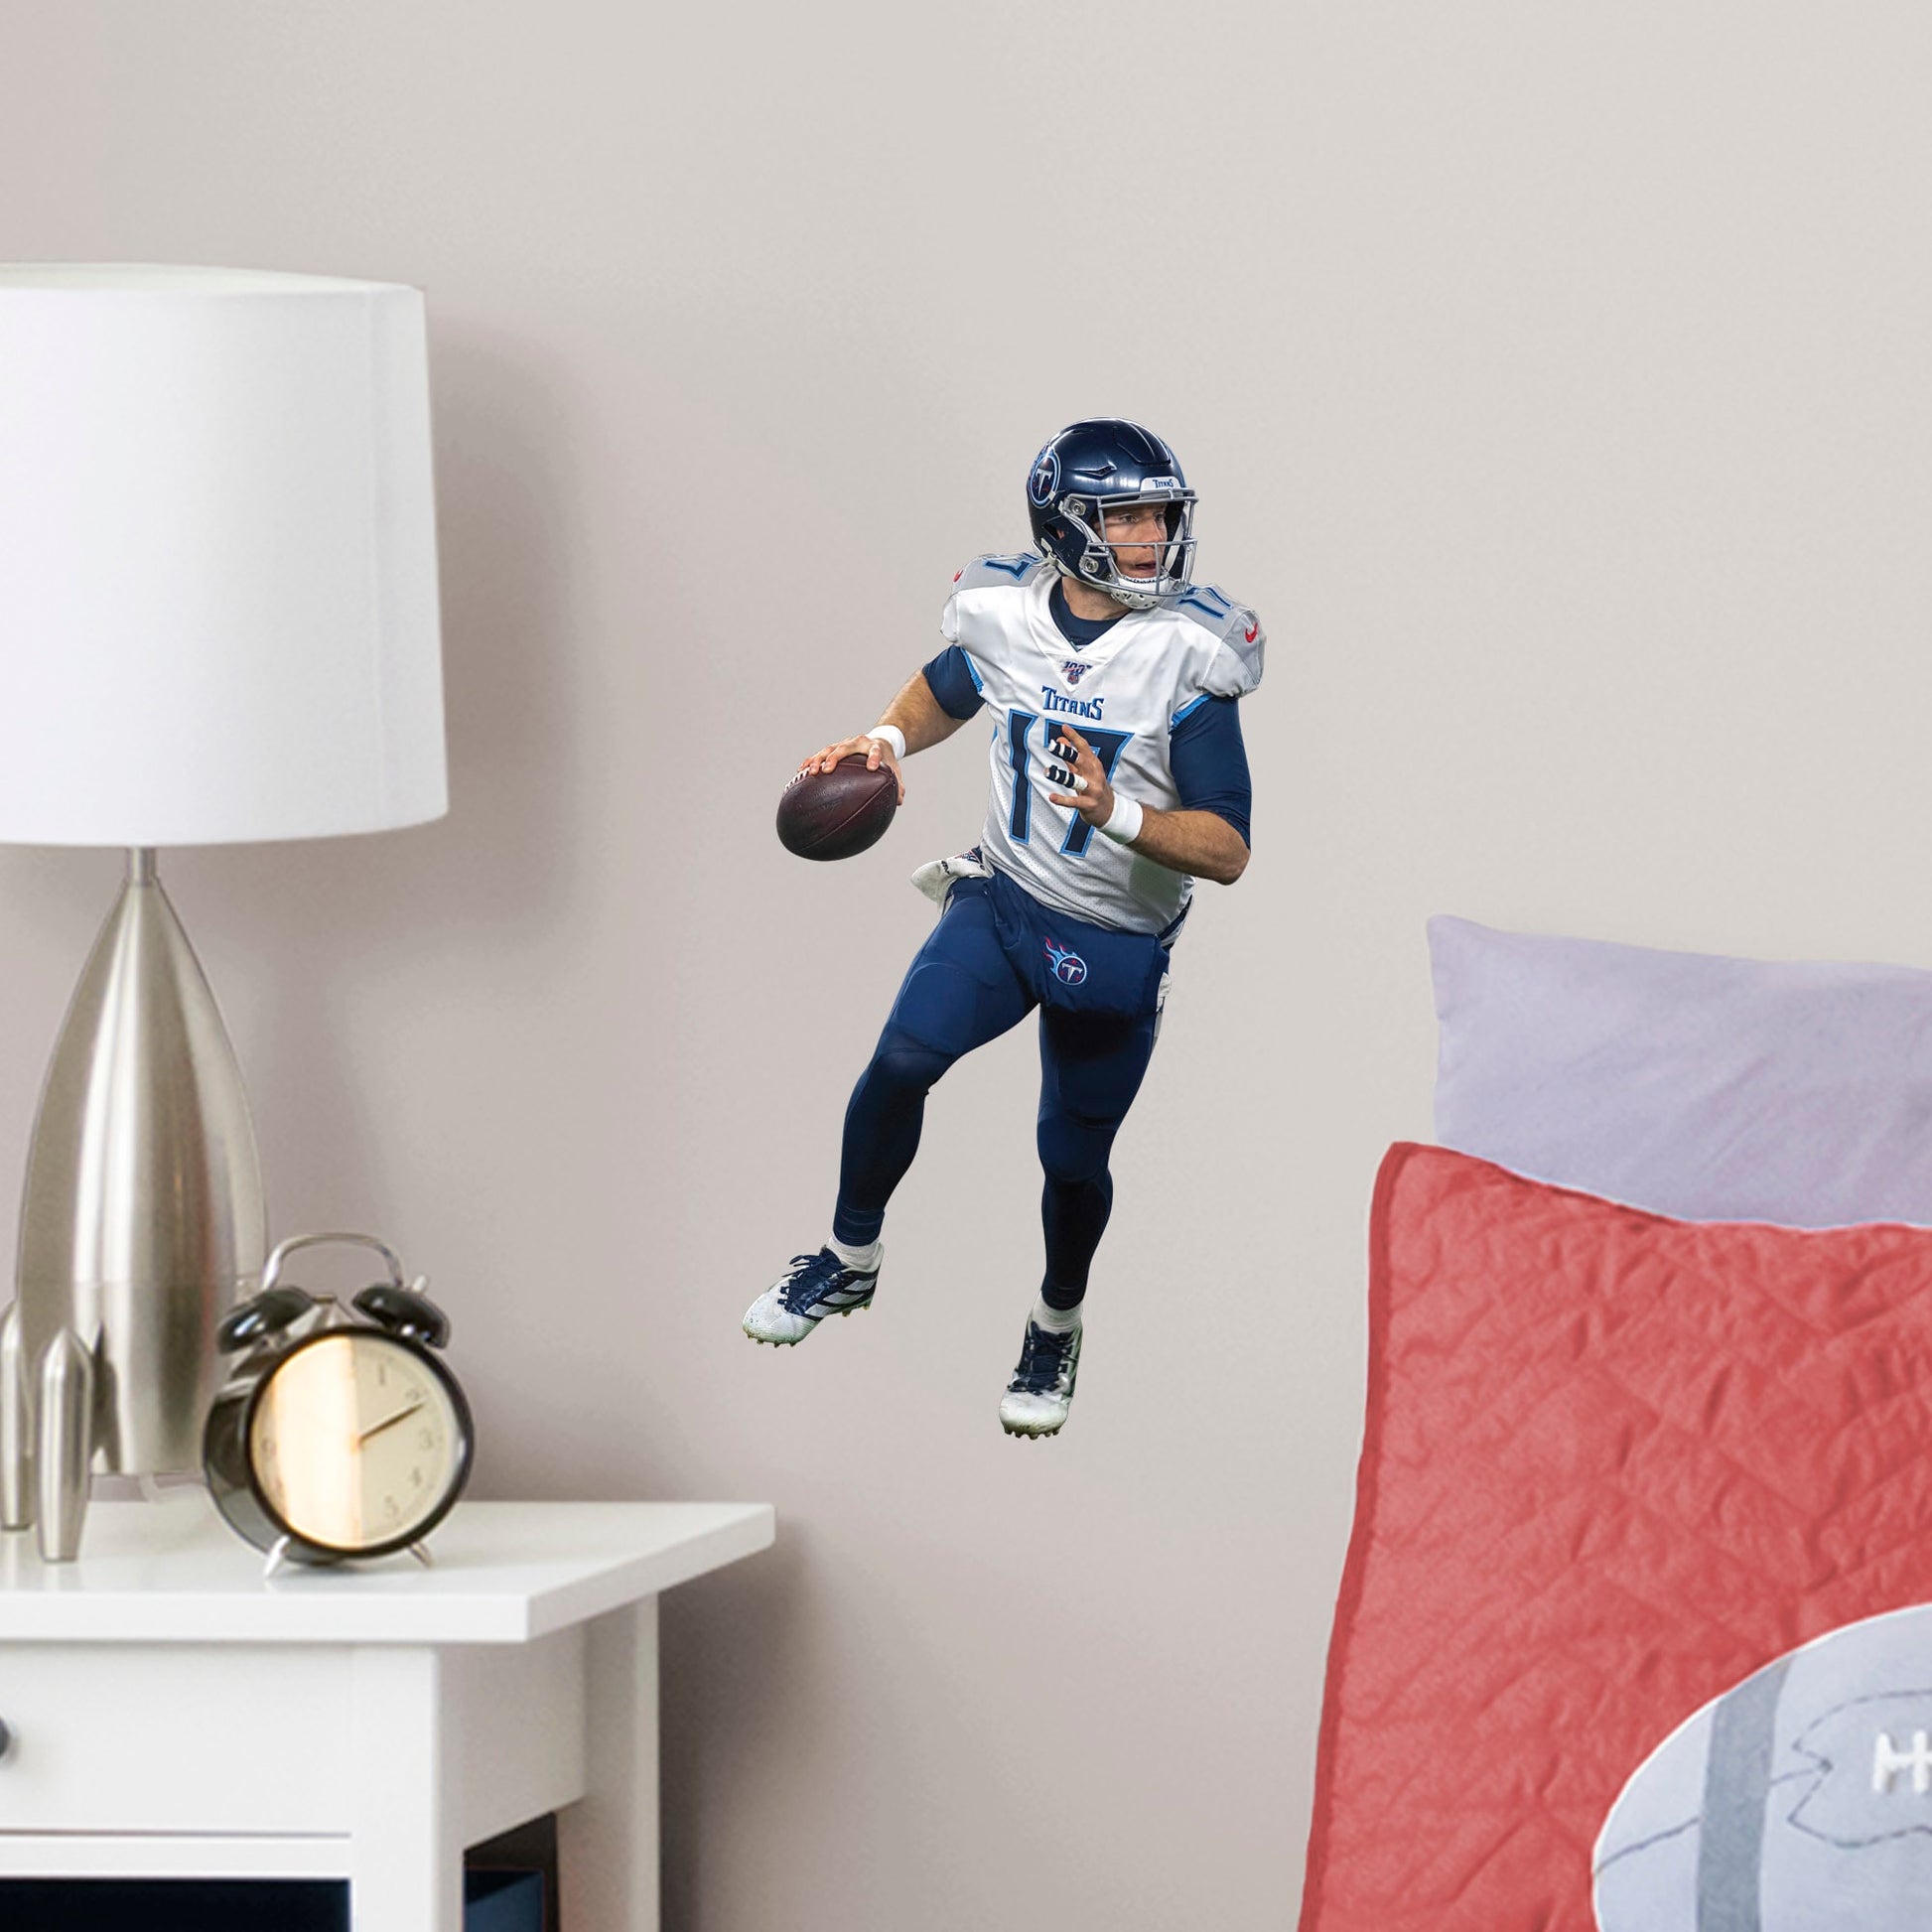 Large Athlete + 2 Decals (8"W x 16.5"H) Show off your support for the NFL 2019 Comeback Player of the Year, Ryan Tannehill, with this officially licensed wall decal of the Tennessee Titan quarterback. Considered one of the best quarterbacks in the NFL, Tannessee is geared up to complete the pass and dominate the AFC South in any bedroom, sports bar, or fan cave with this high-quality wall decal in the iconic Titans navy blue and silver uniform. Nashville isn't just for music, Let's go Titans!